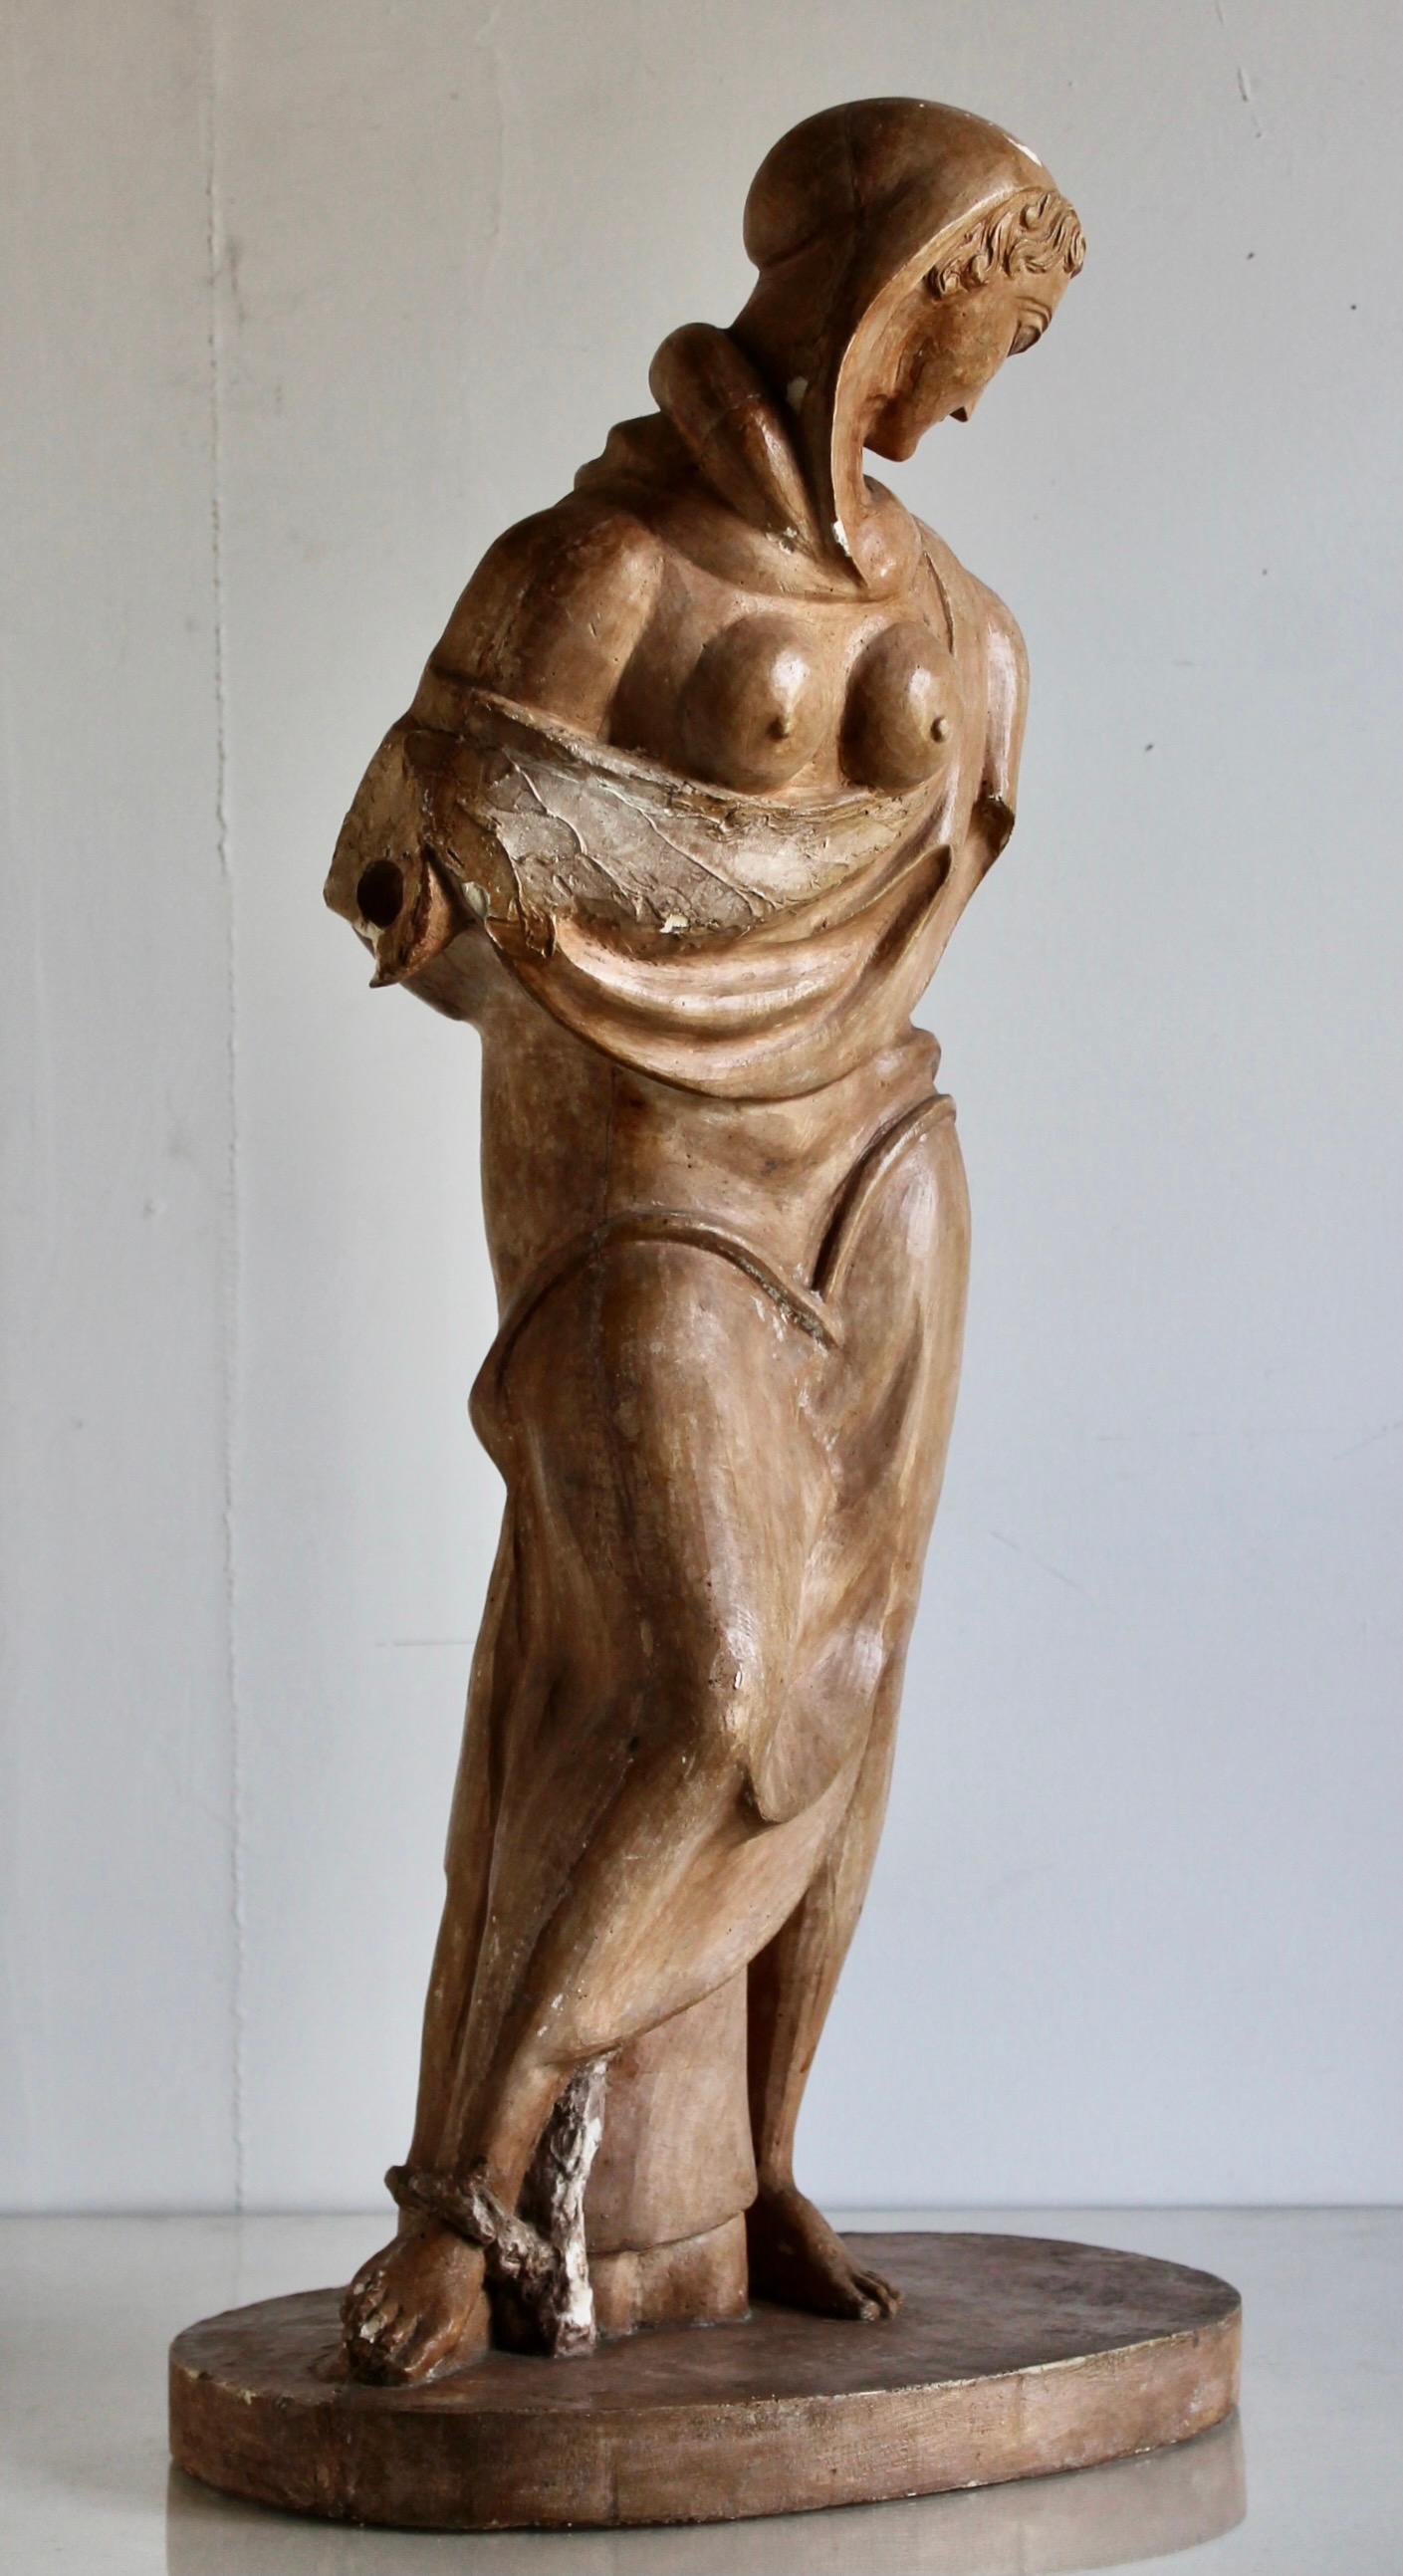 A plaster cast of Elie Nadelman's important early proto-cubist Draped Standing Female Figure 